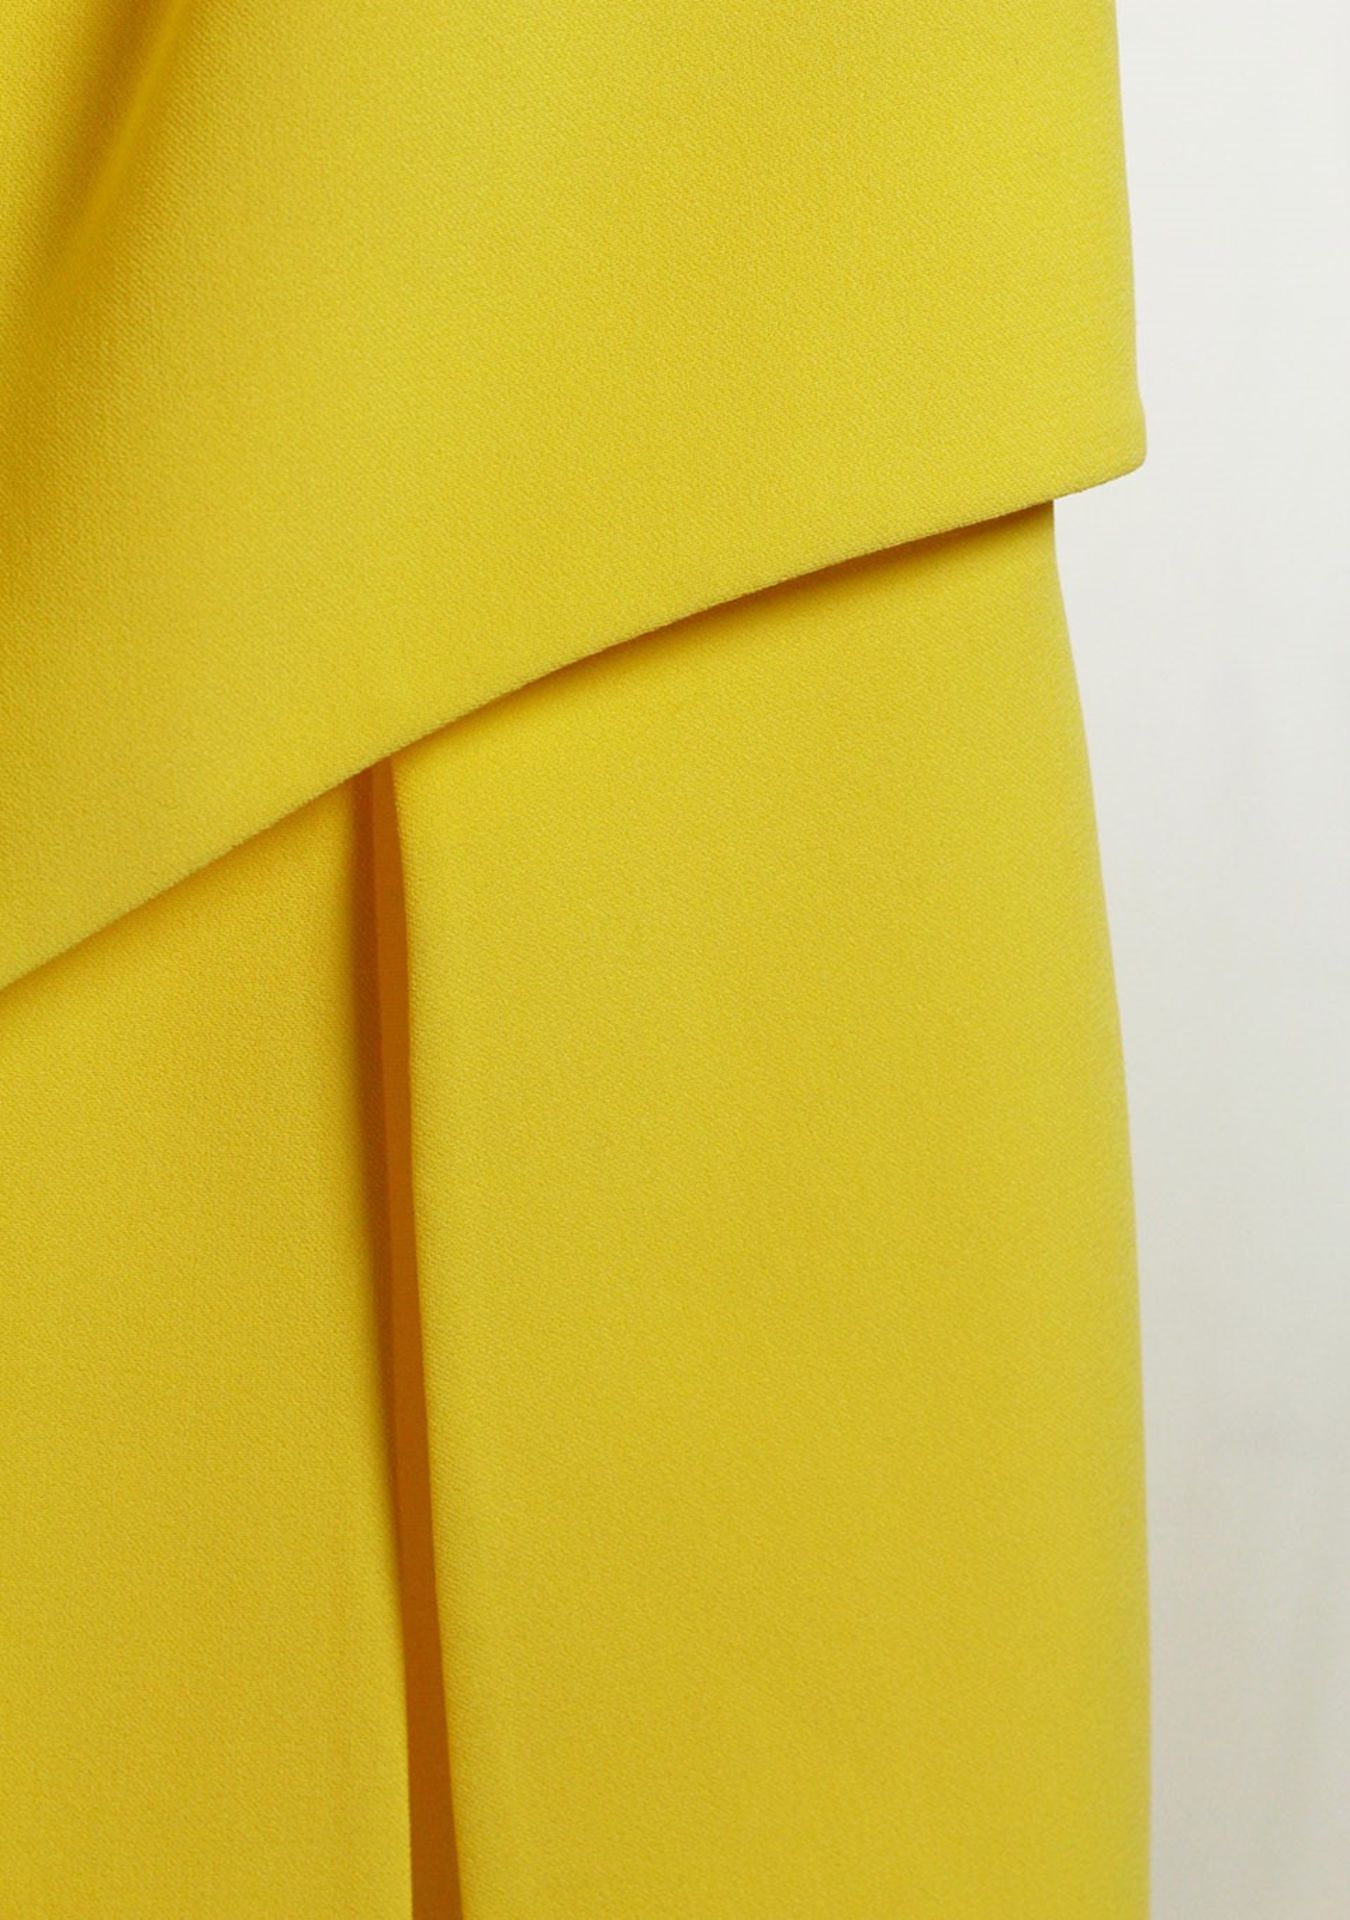 1 x Boutique Le Duc Yellow Dress - Size: 12 - Material: 68% Acetate, 32% Viscose - From a High End - Image 9 of 14